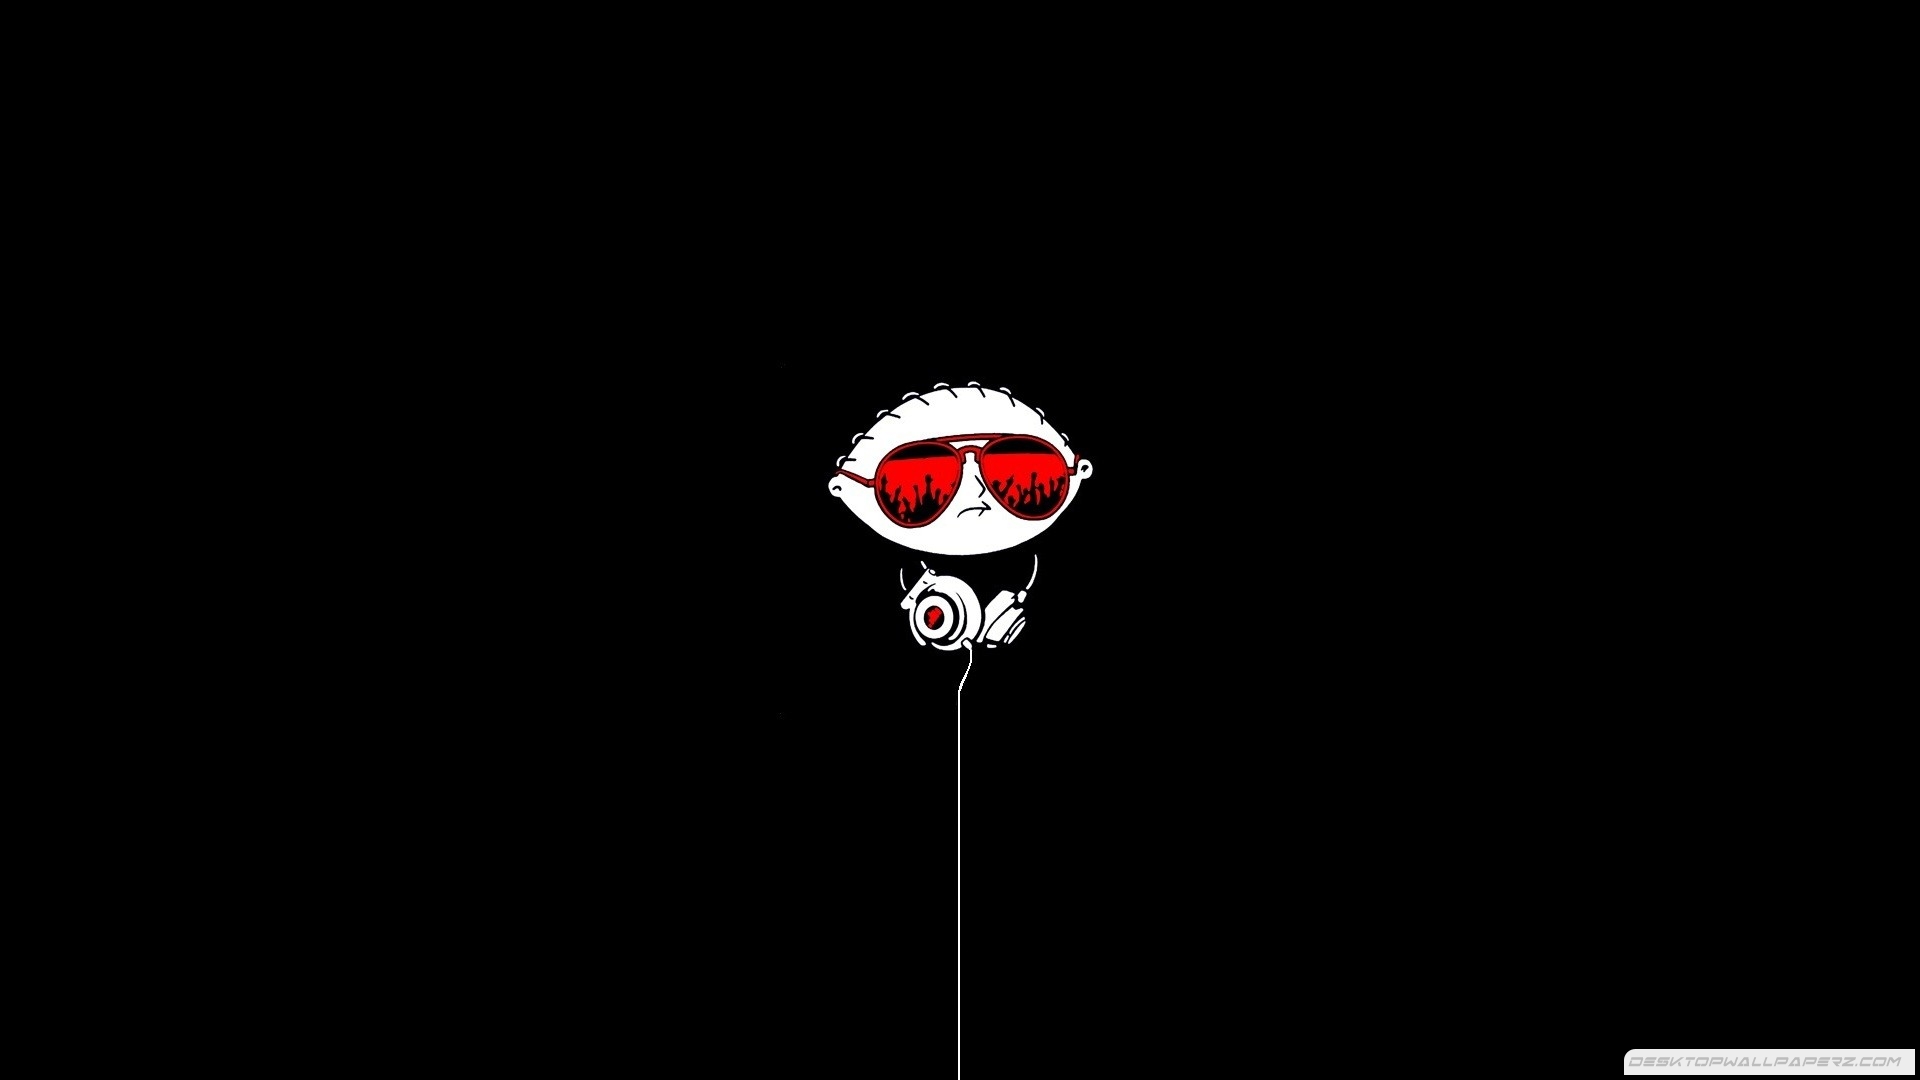 Minimal Dark Black Backgroung Family Guy Glasses Funny Stewie Griffin